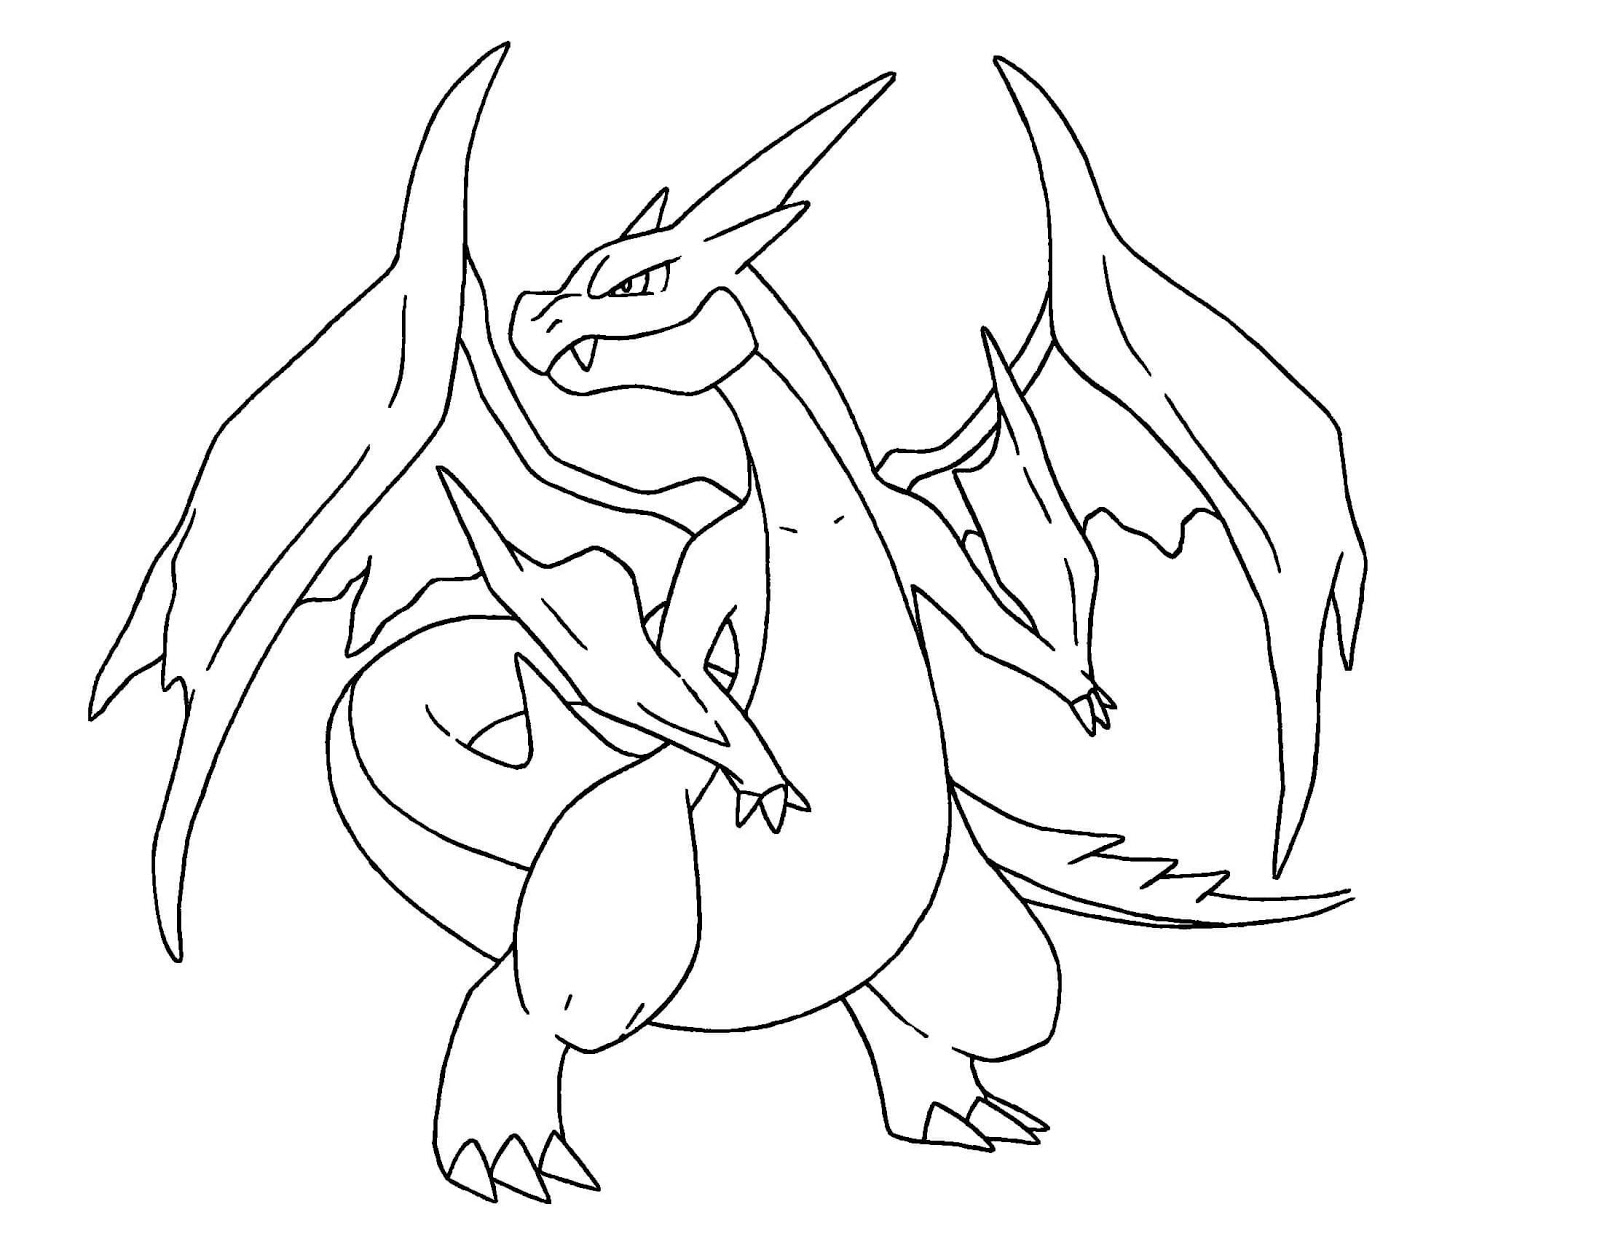 Printable Charizard Coloring Pages for Free - Free Pokemon ...